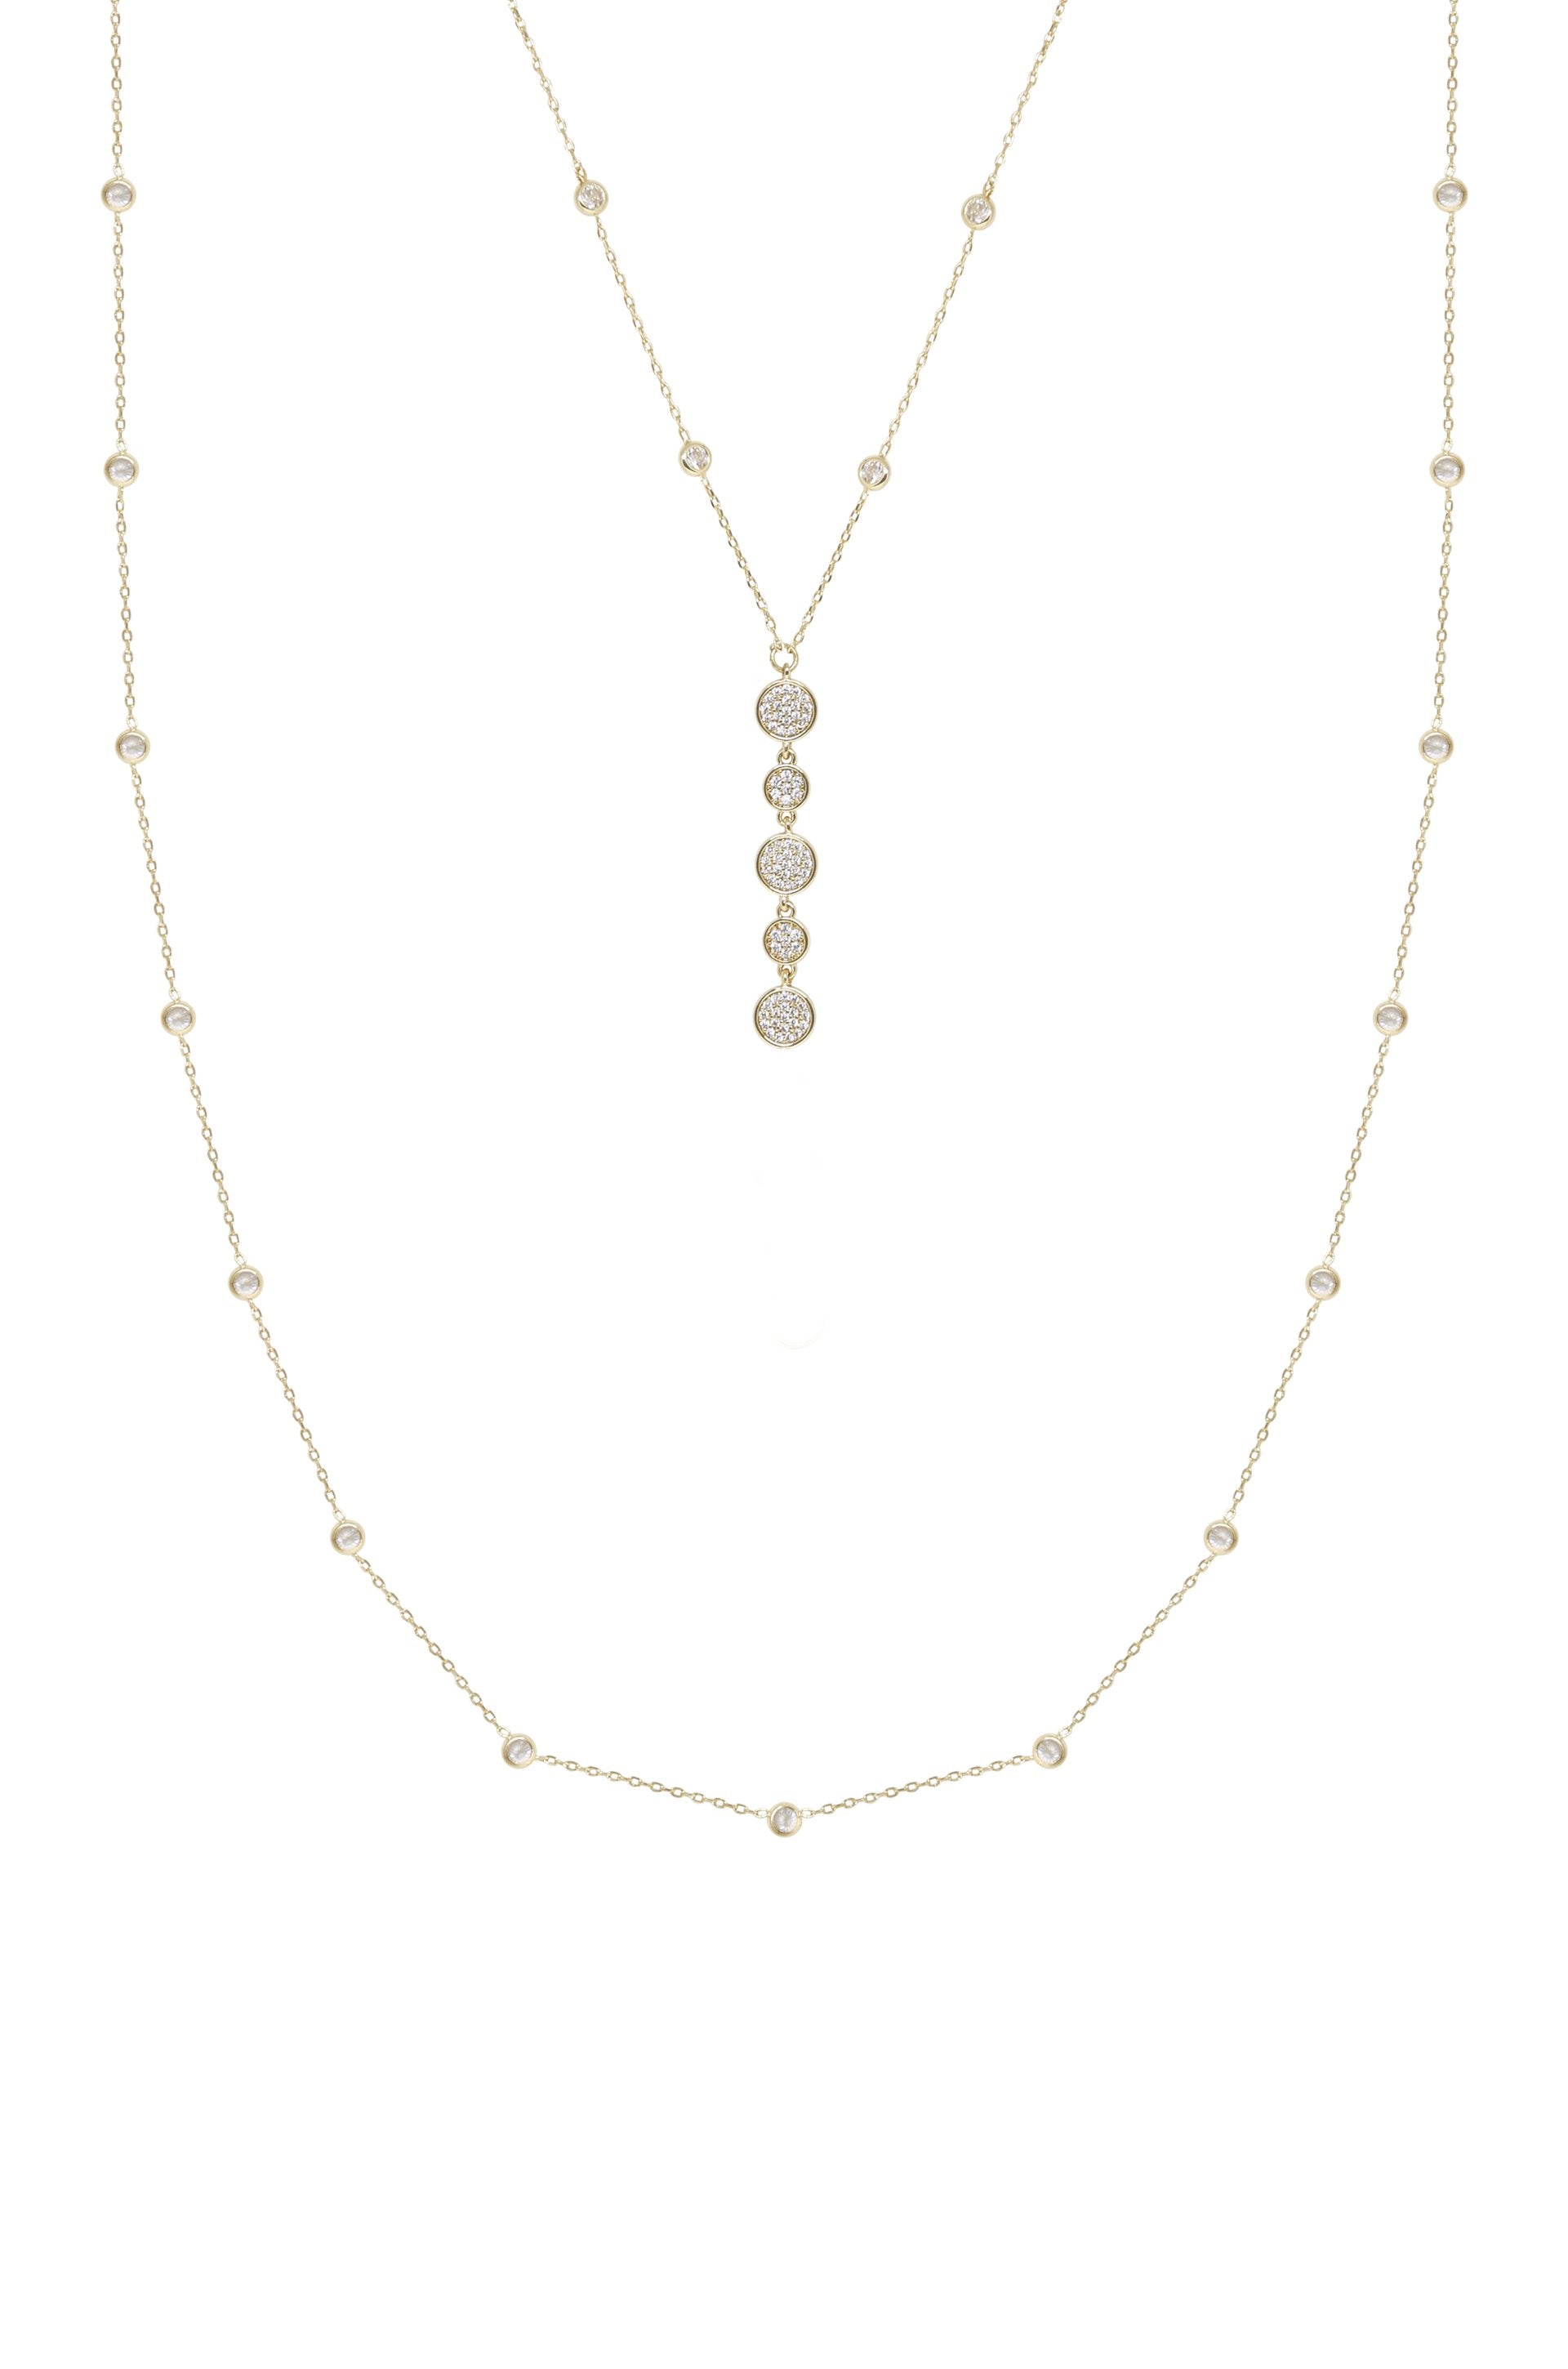 Black Tie Layered Crystal and 18k Gold Plated Necklace Set on white background  